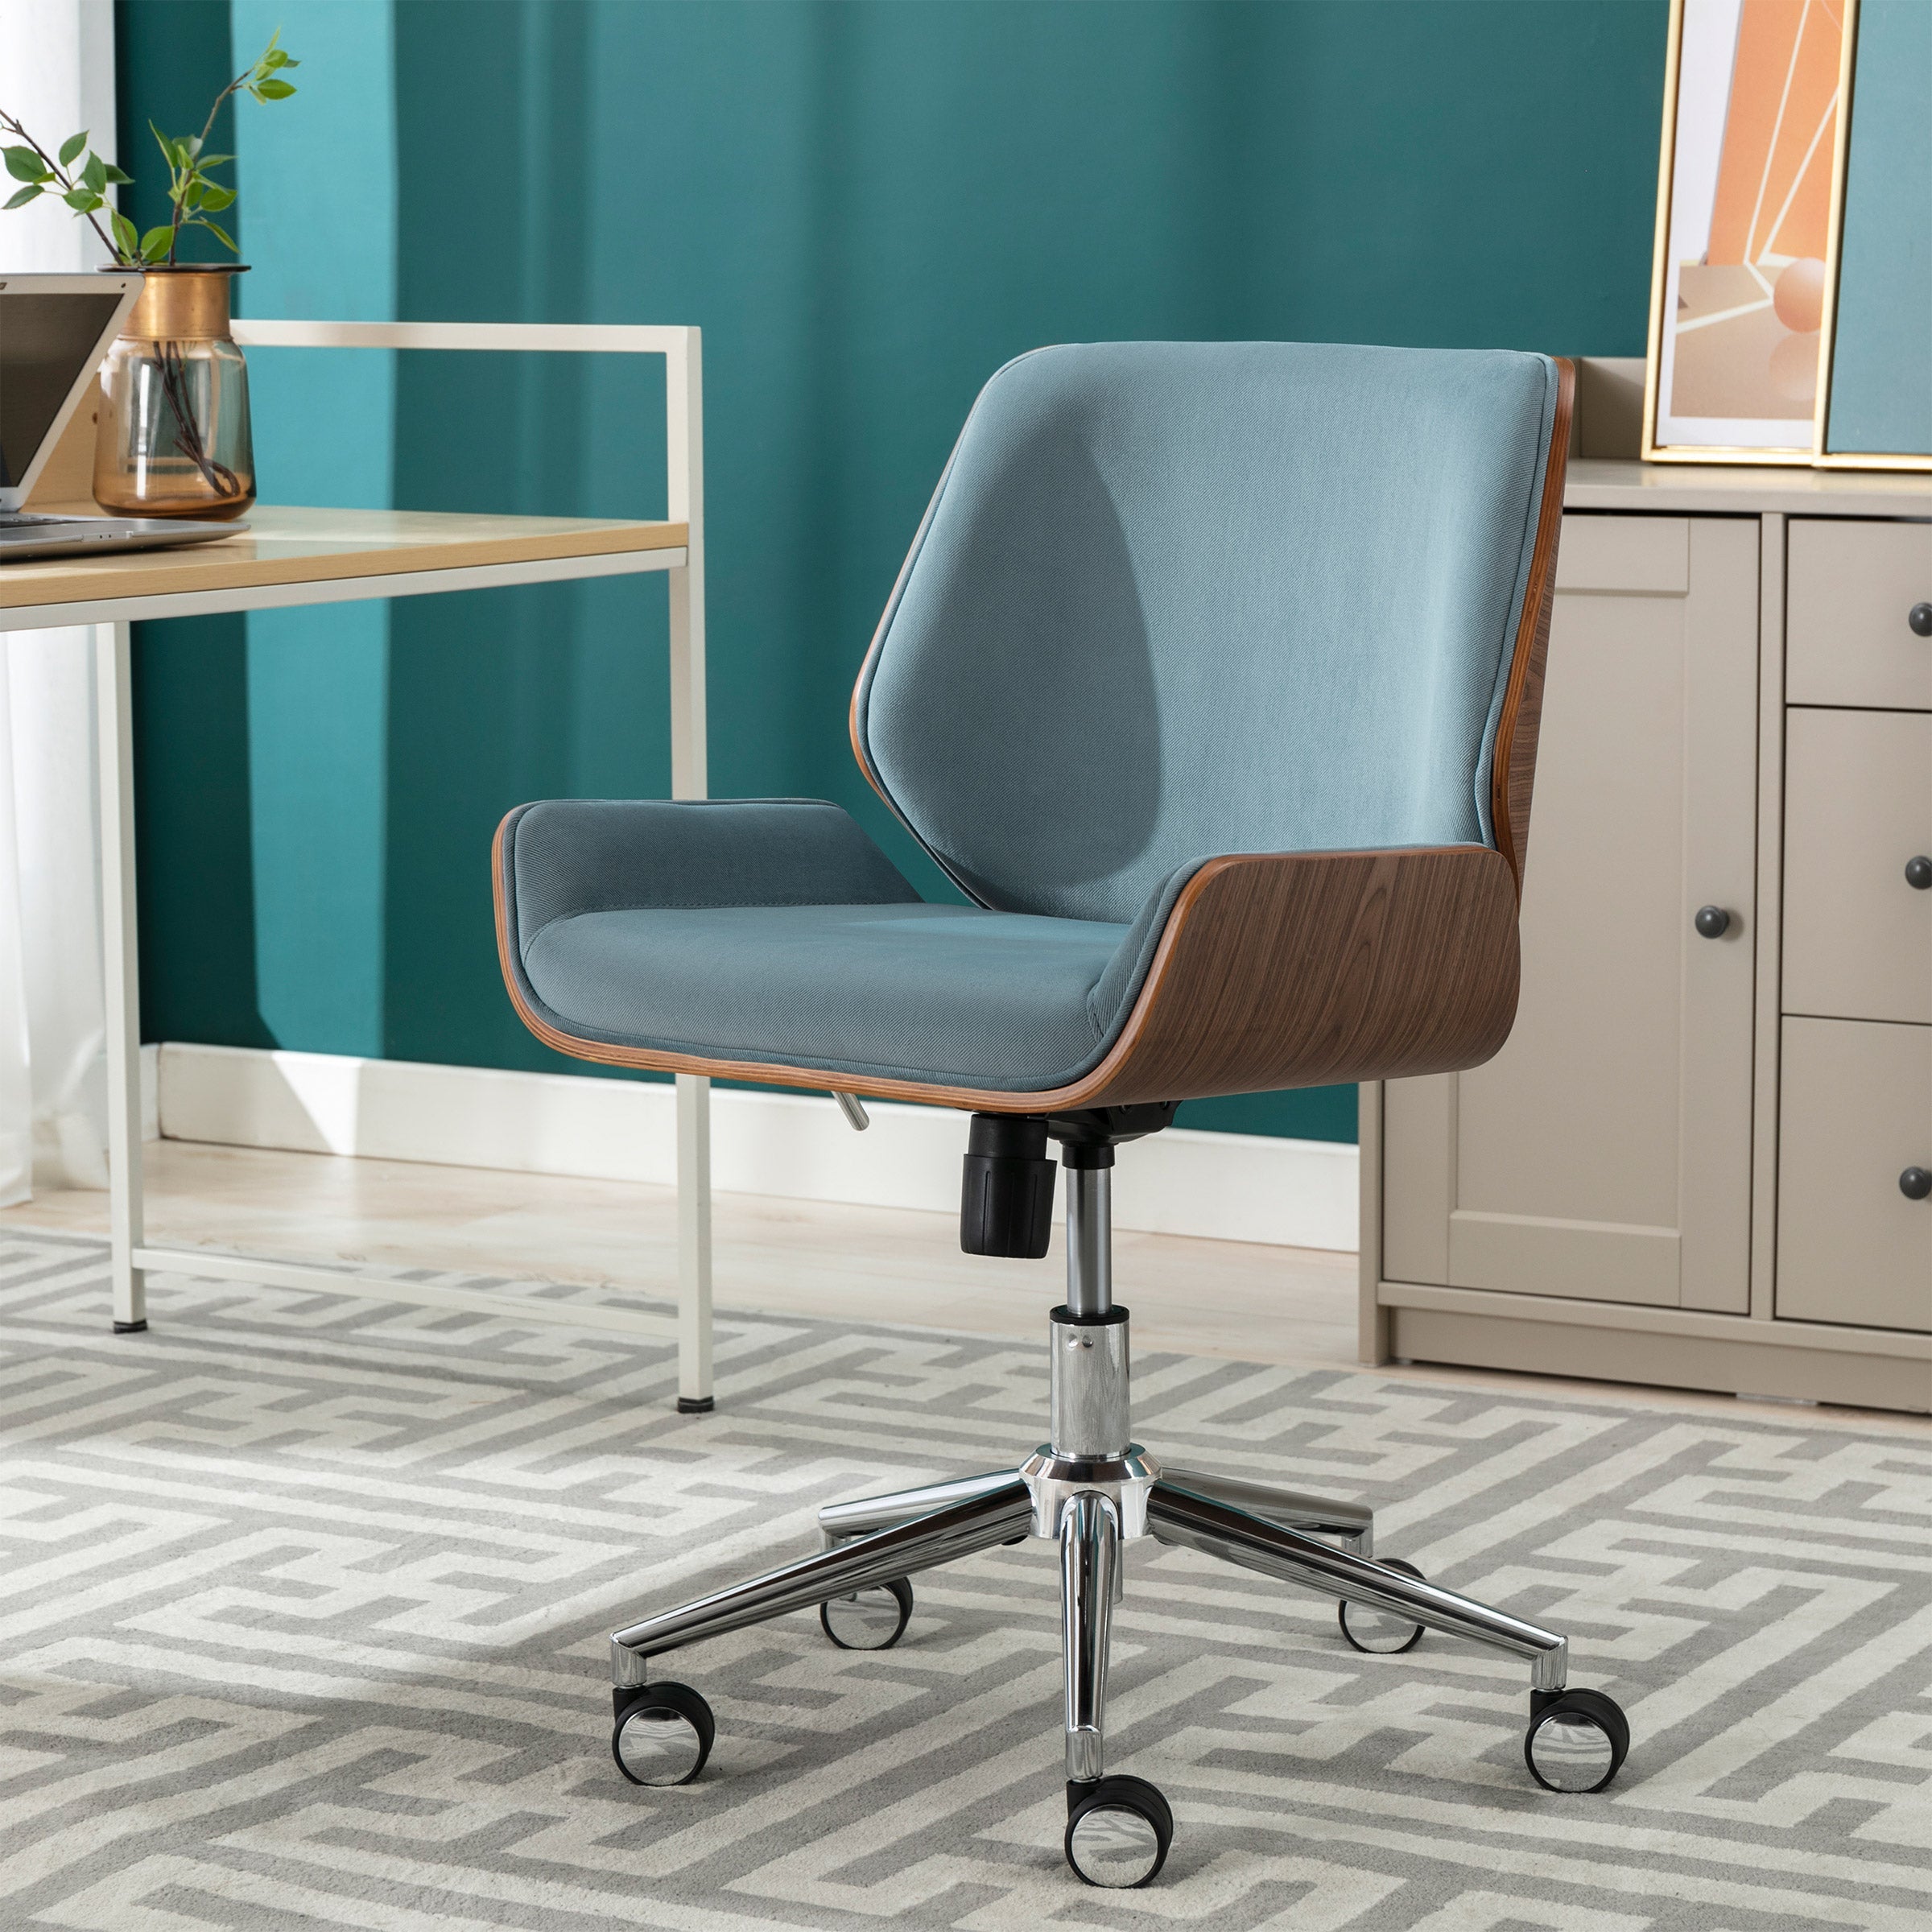 Lillian August Ciara Fabric Bentwood Office Chair – RJP Unlimited